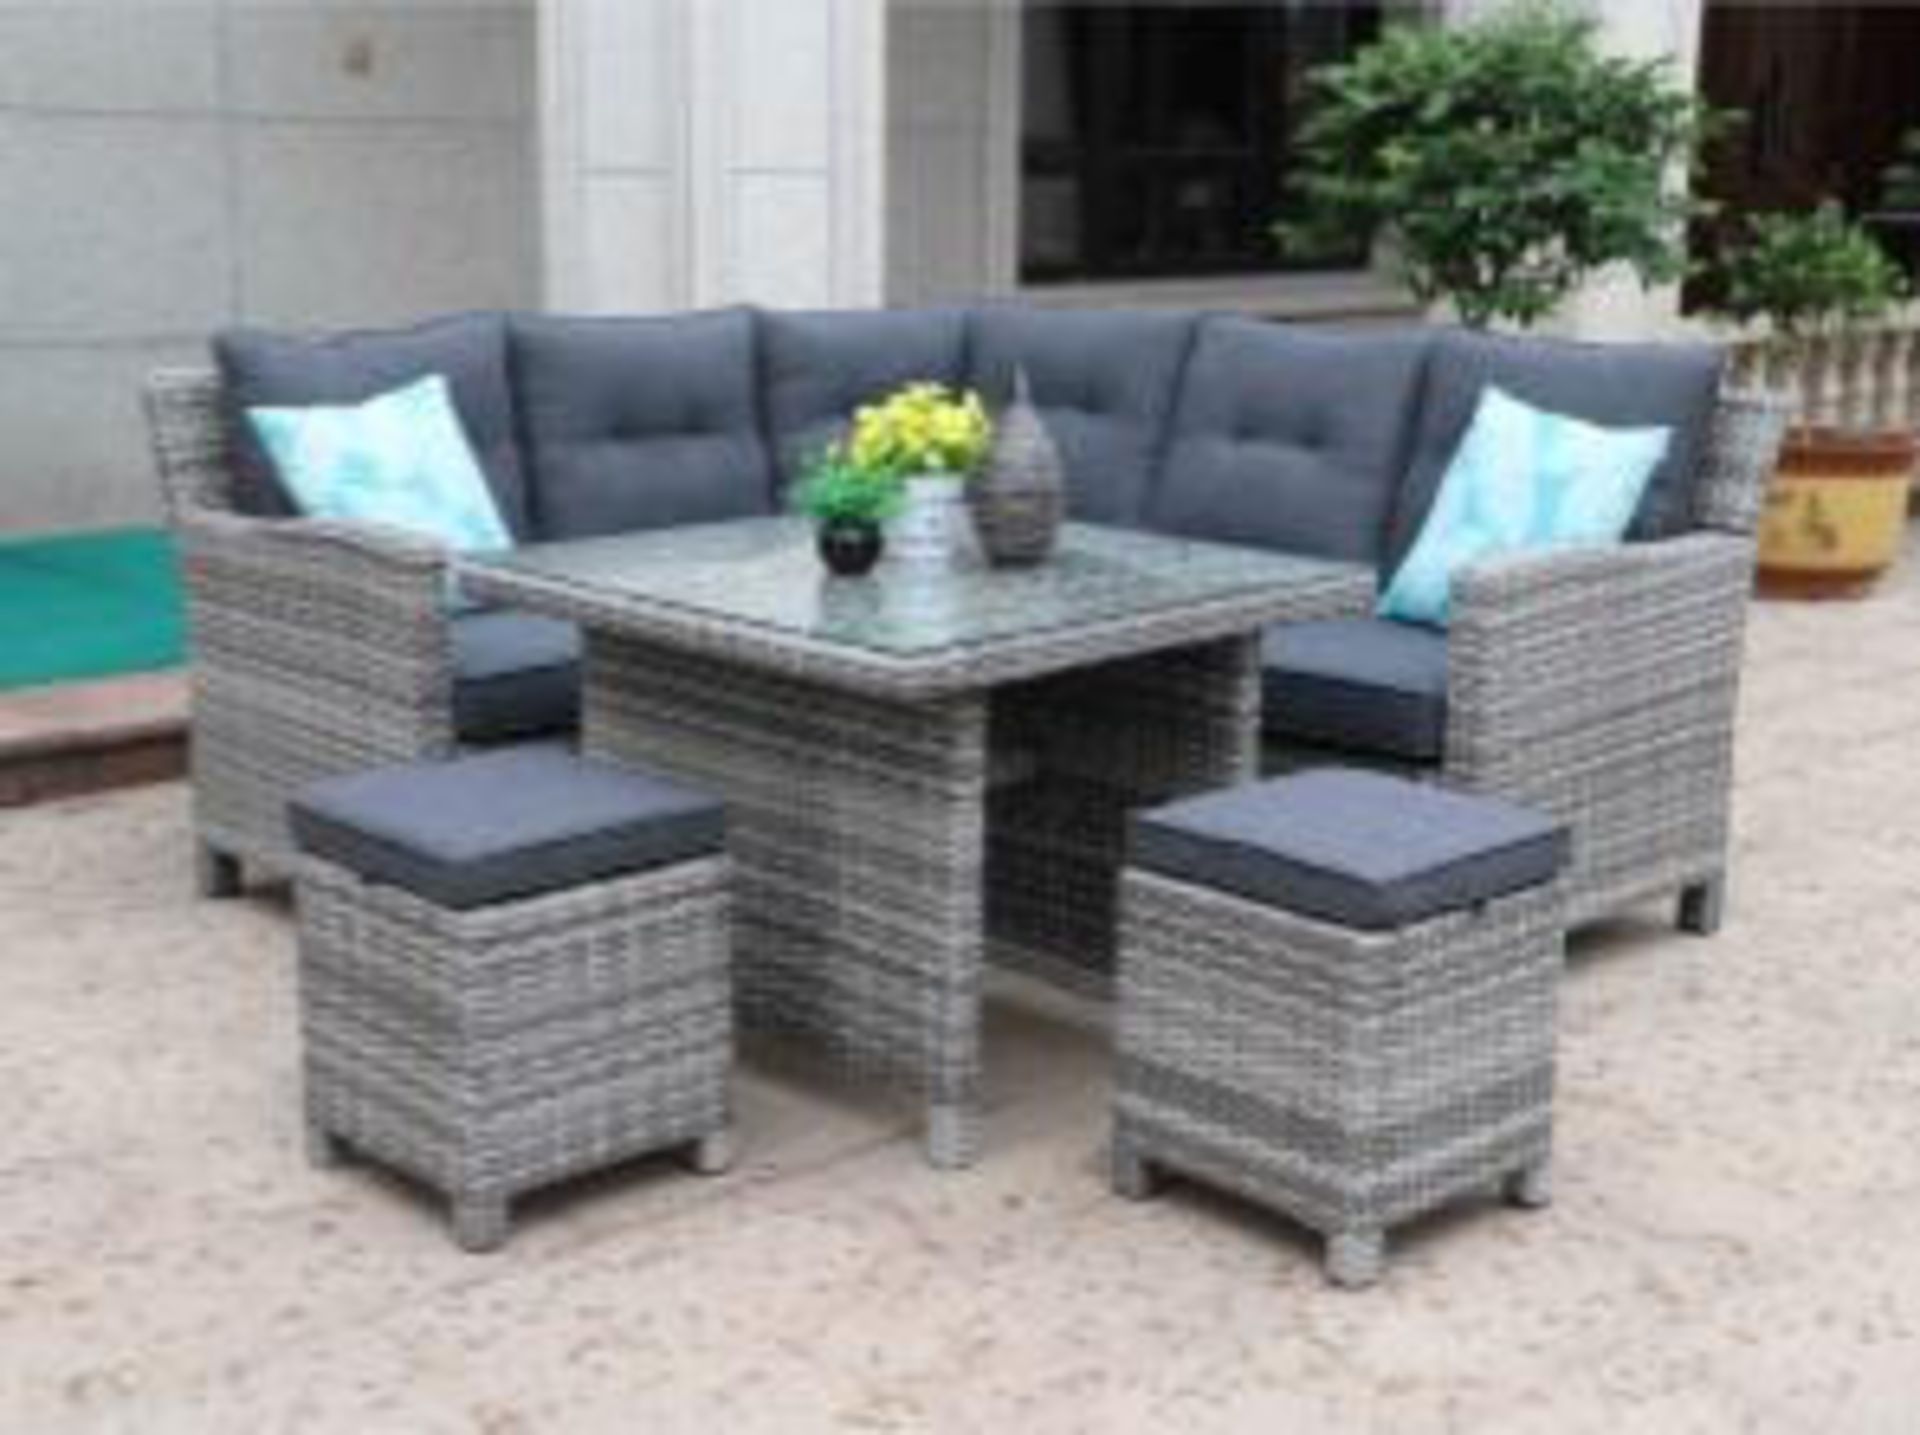 + VAT Brand New Chelsea Garden Company Four Person Table & Chair Sets - Aluminium Frame - Double 1/